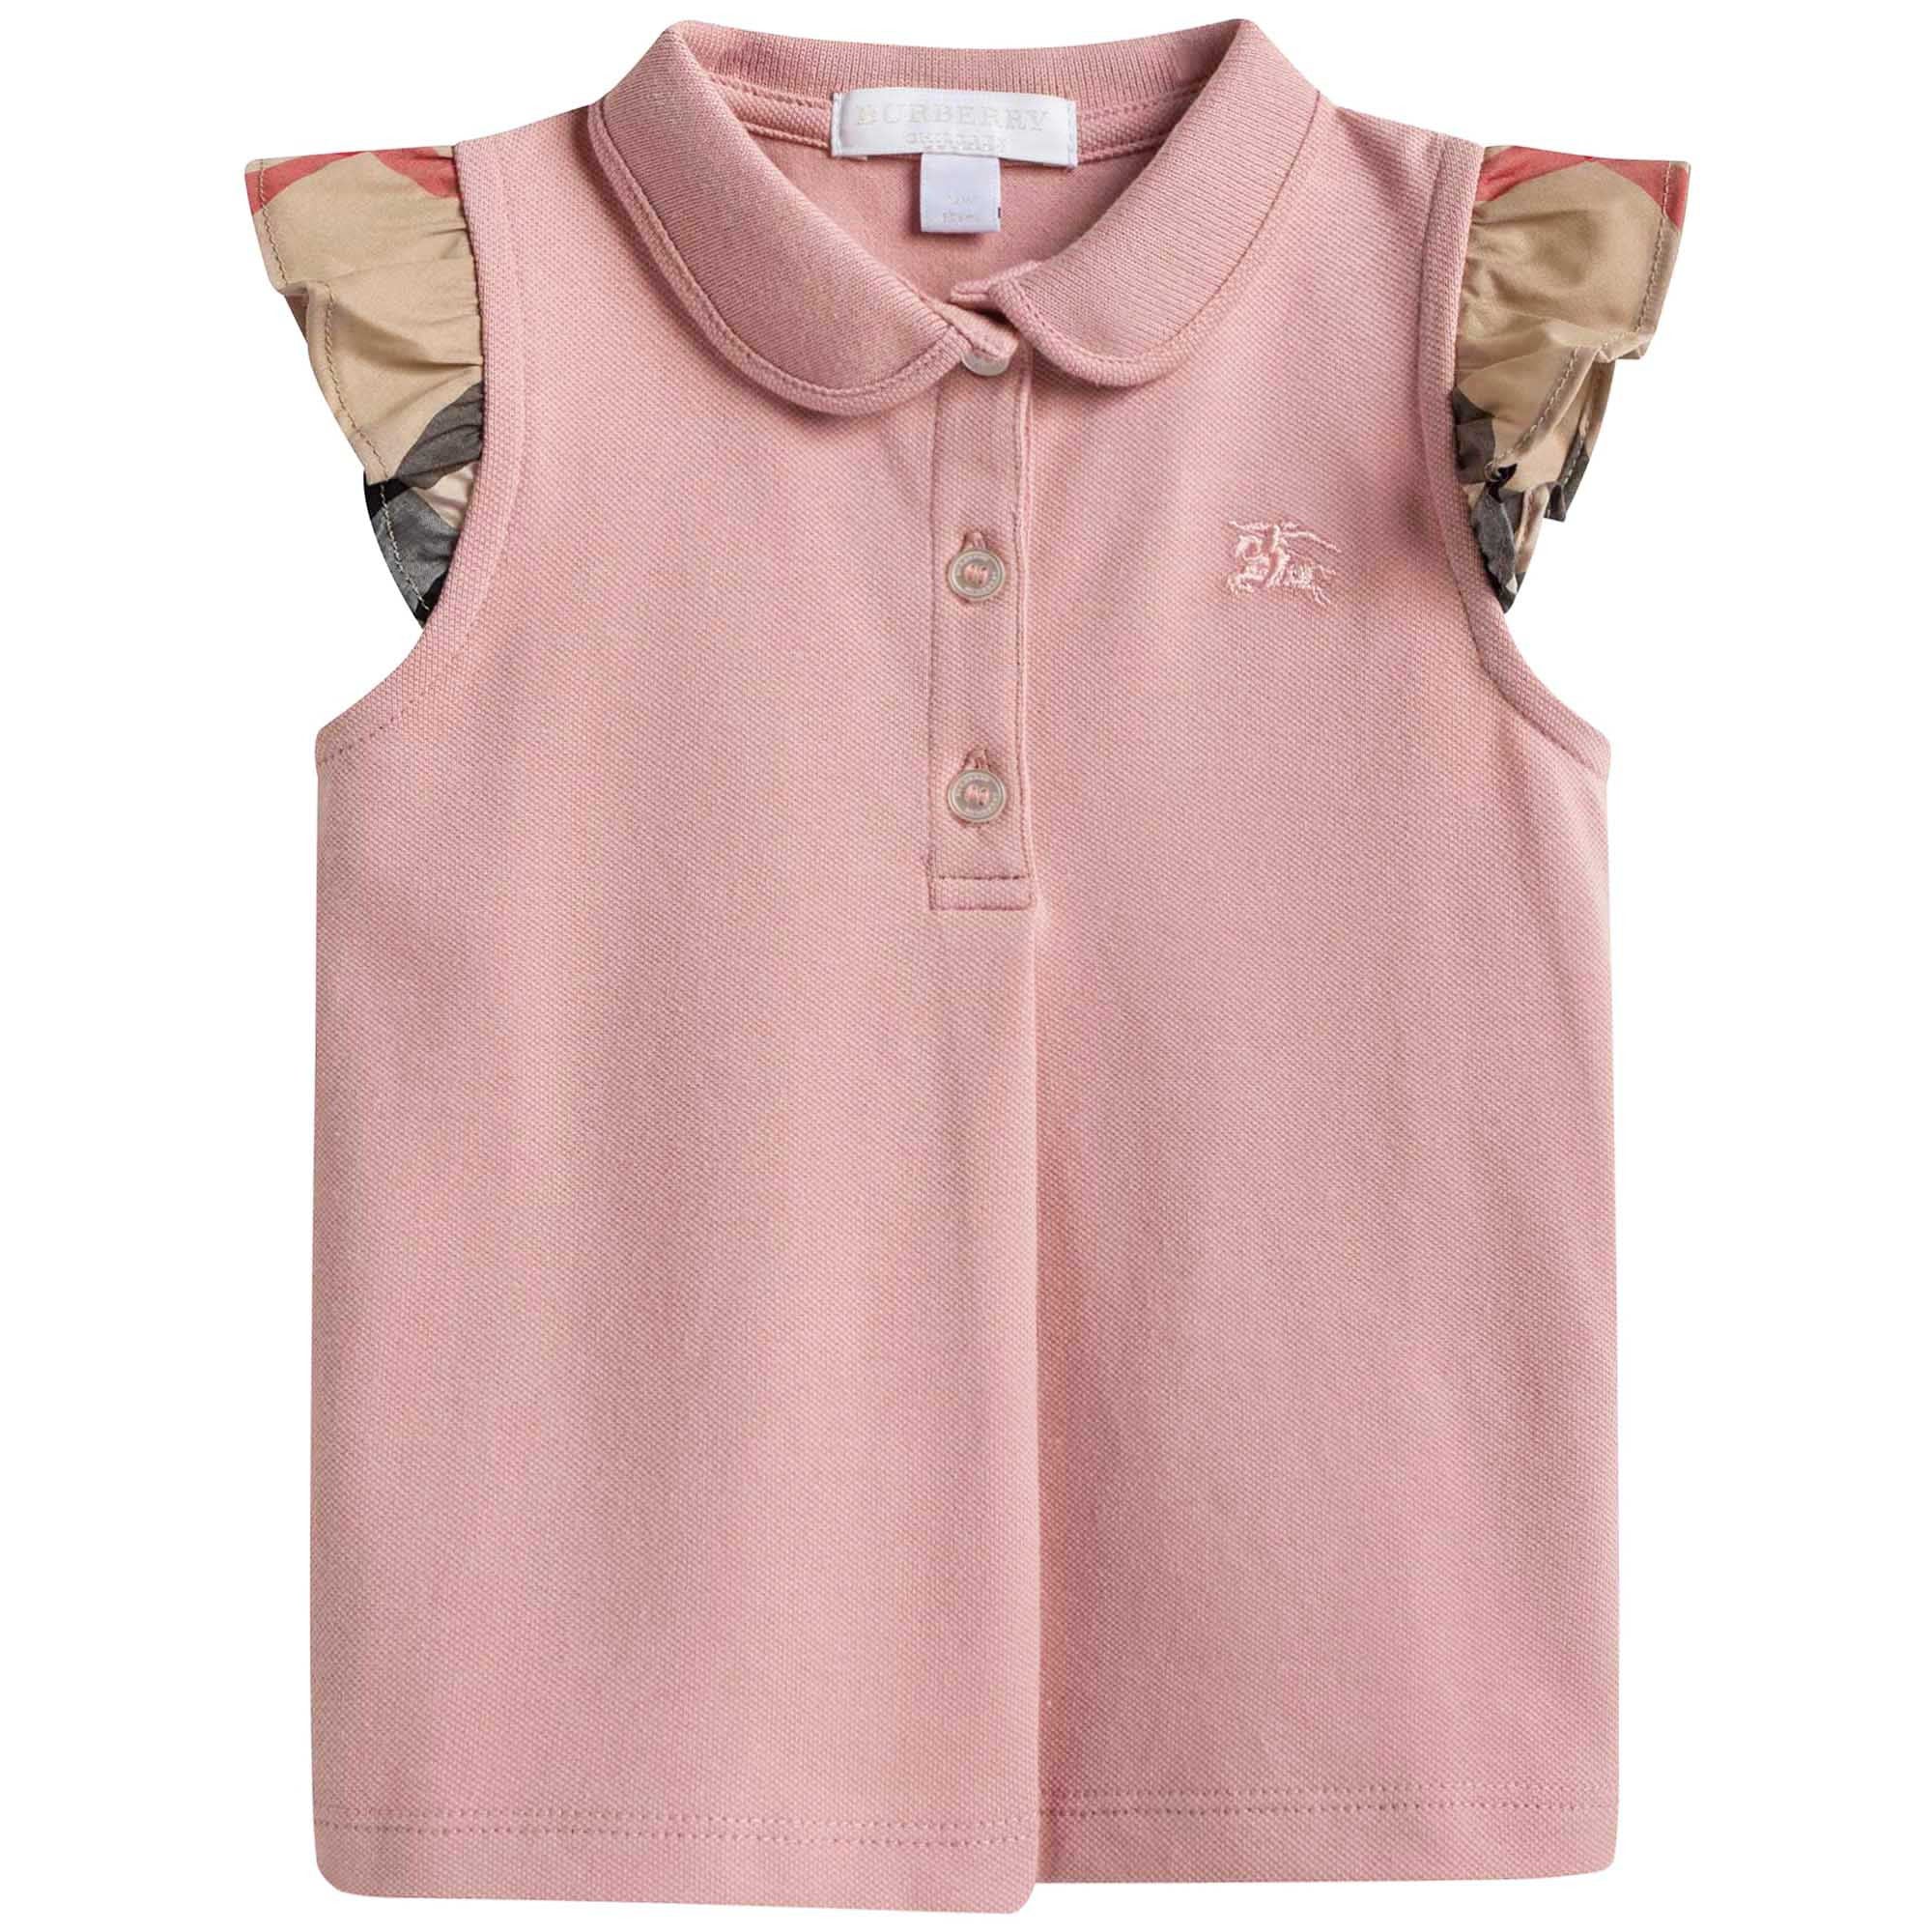 Baby Girls Light Pink Polo Shirt with Check Ruffles